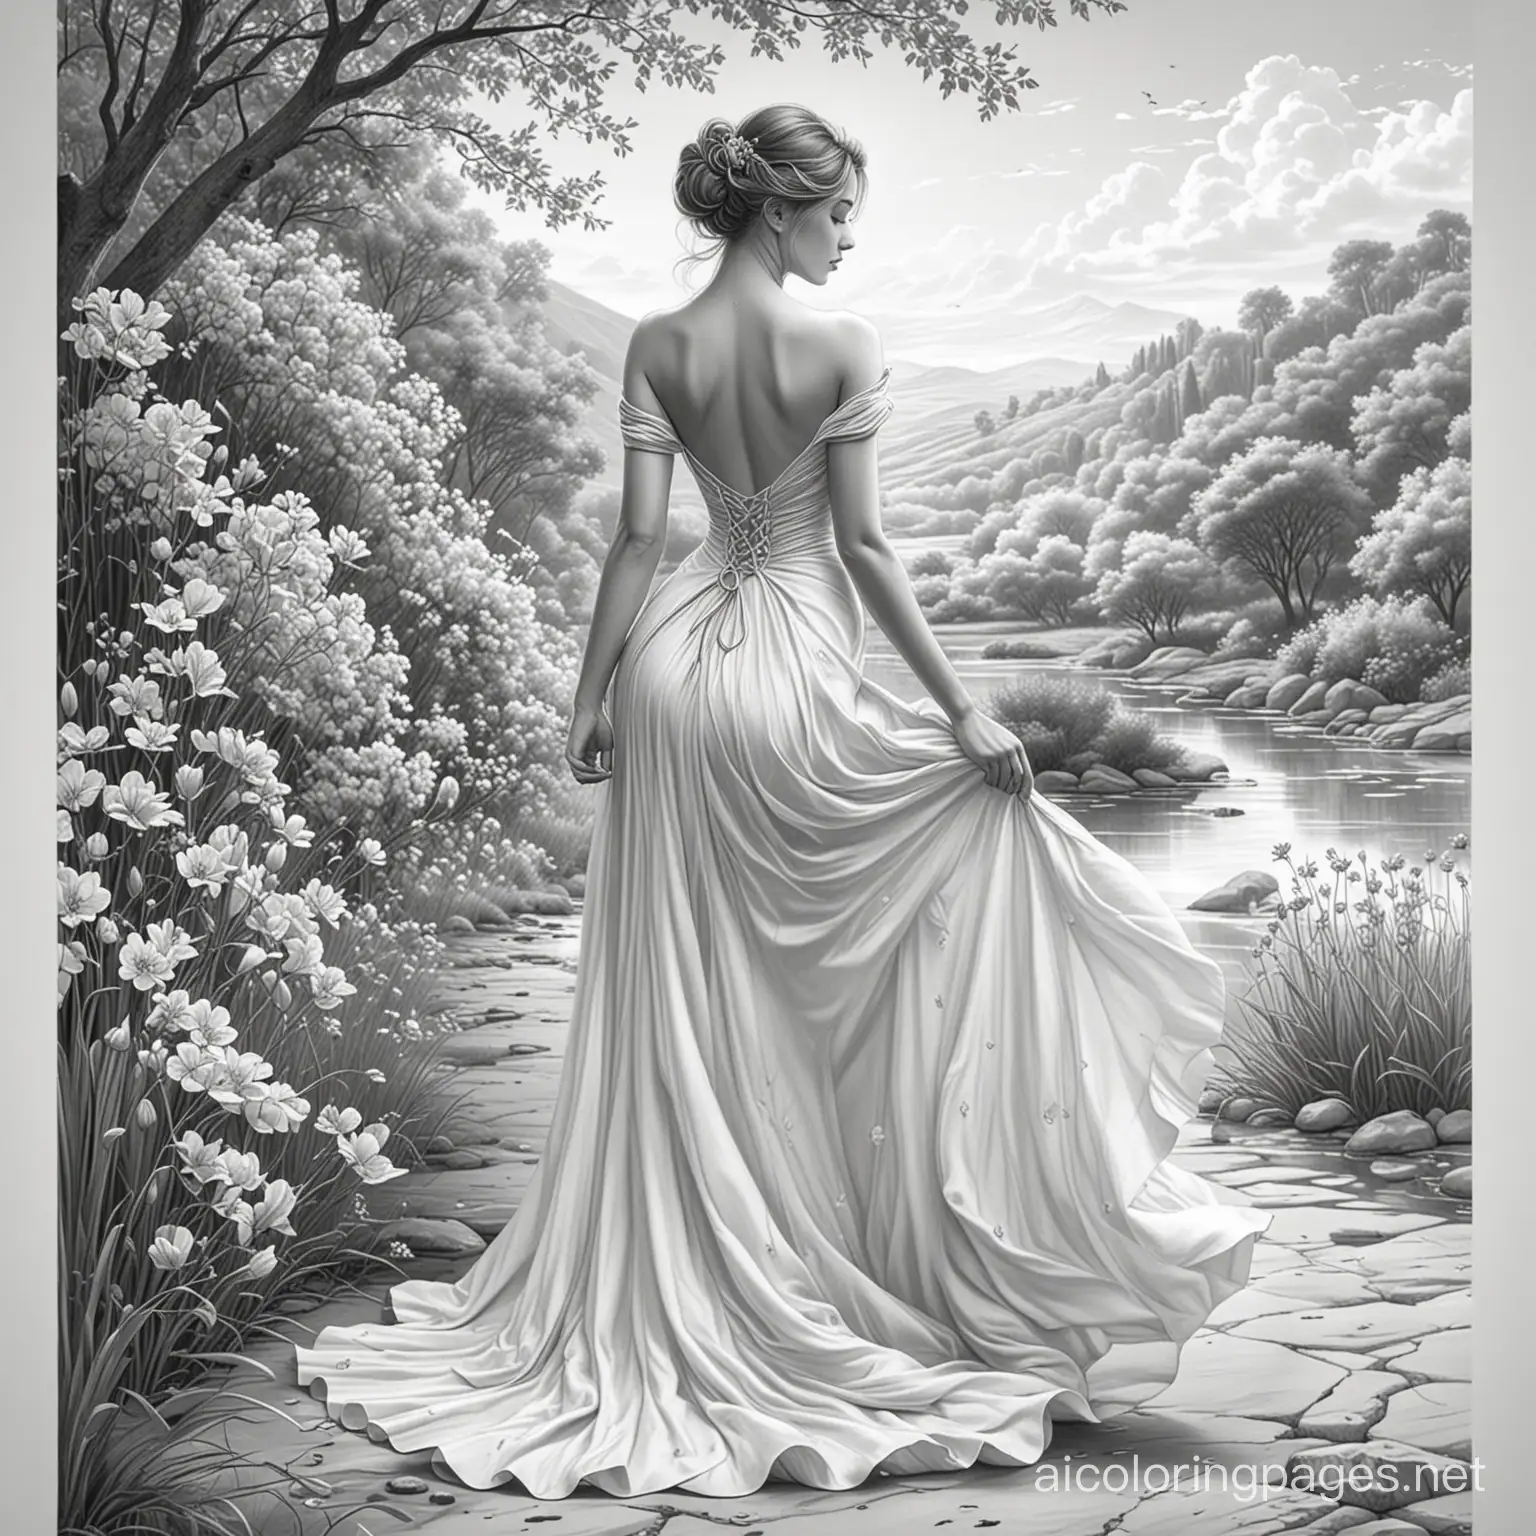  A stunning, cinematic hard pencil drawing by the talented artist Mikaslpz . The illustration captures the Whole full  bodly of a beautiful,  sophisticated full body woman, showcasing her elegant posture and the perfect curve of her back. She is adorned with a flowing dress with delicate flowers, and the background is filled with a serene, natural landscape. The overall atmosphere of the illustration is one of beauty,grace, and harmony with nature., illustration, cinematic , Coloring Page, black and white, line art, white background, Simplicity, Ample White Space. The background of the coloring page is plain white to make it easy for young children to color within the lines. The outlines of all the subjects are easy to distinguish, making it simple for kids to color without too much difficulty